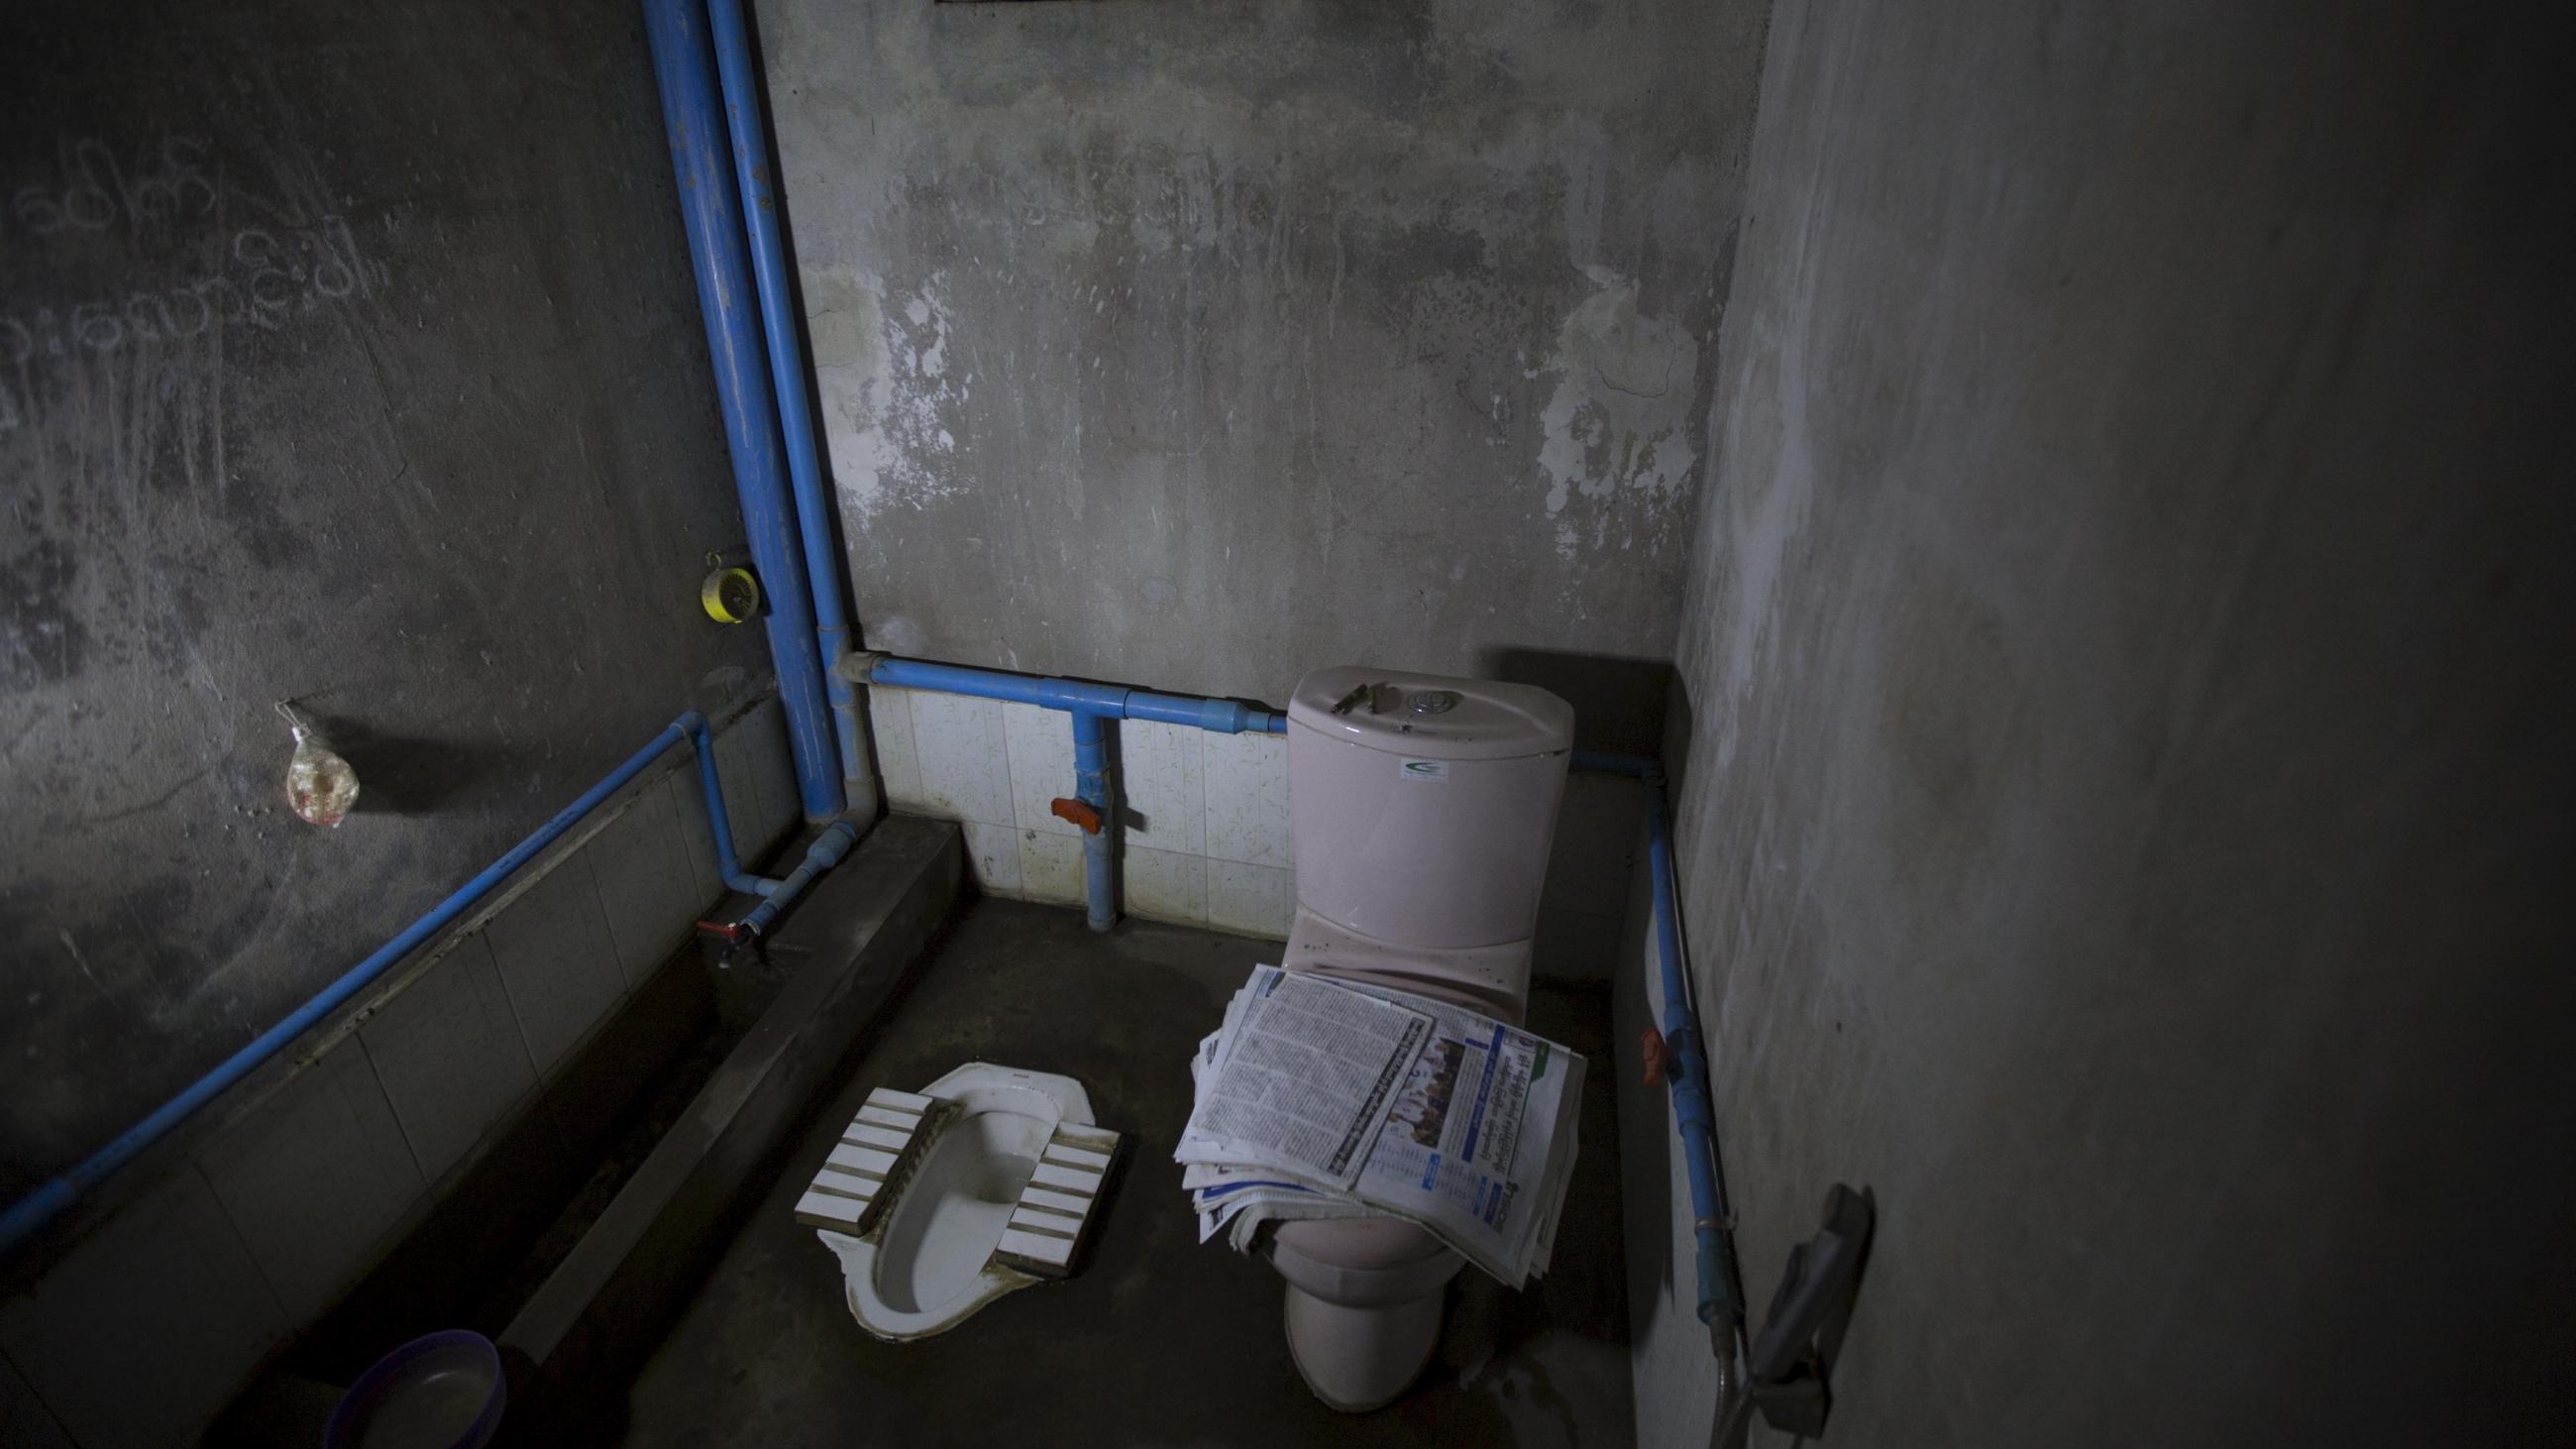 Newspapers are seen on a toilet seat next to a traditional squat toilet in a private home in Mandalay, Myanmar, October 5, 2015.